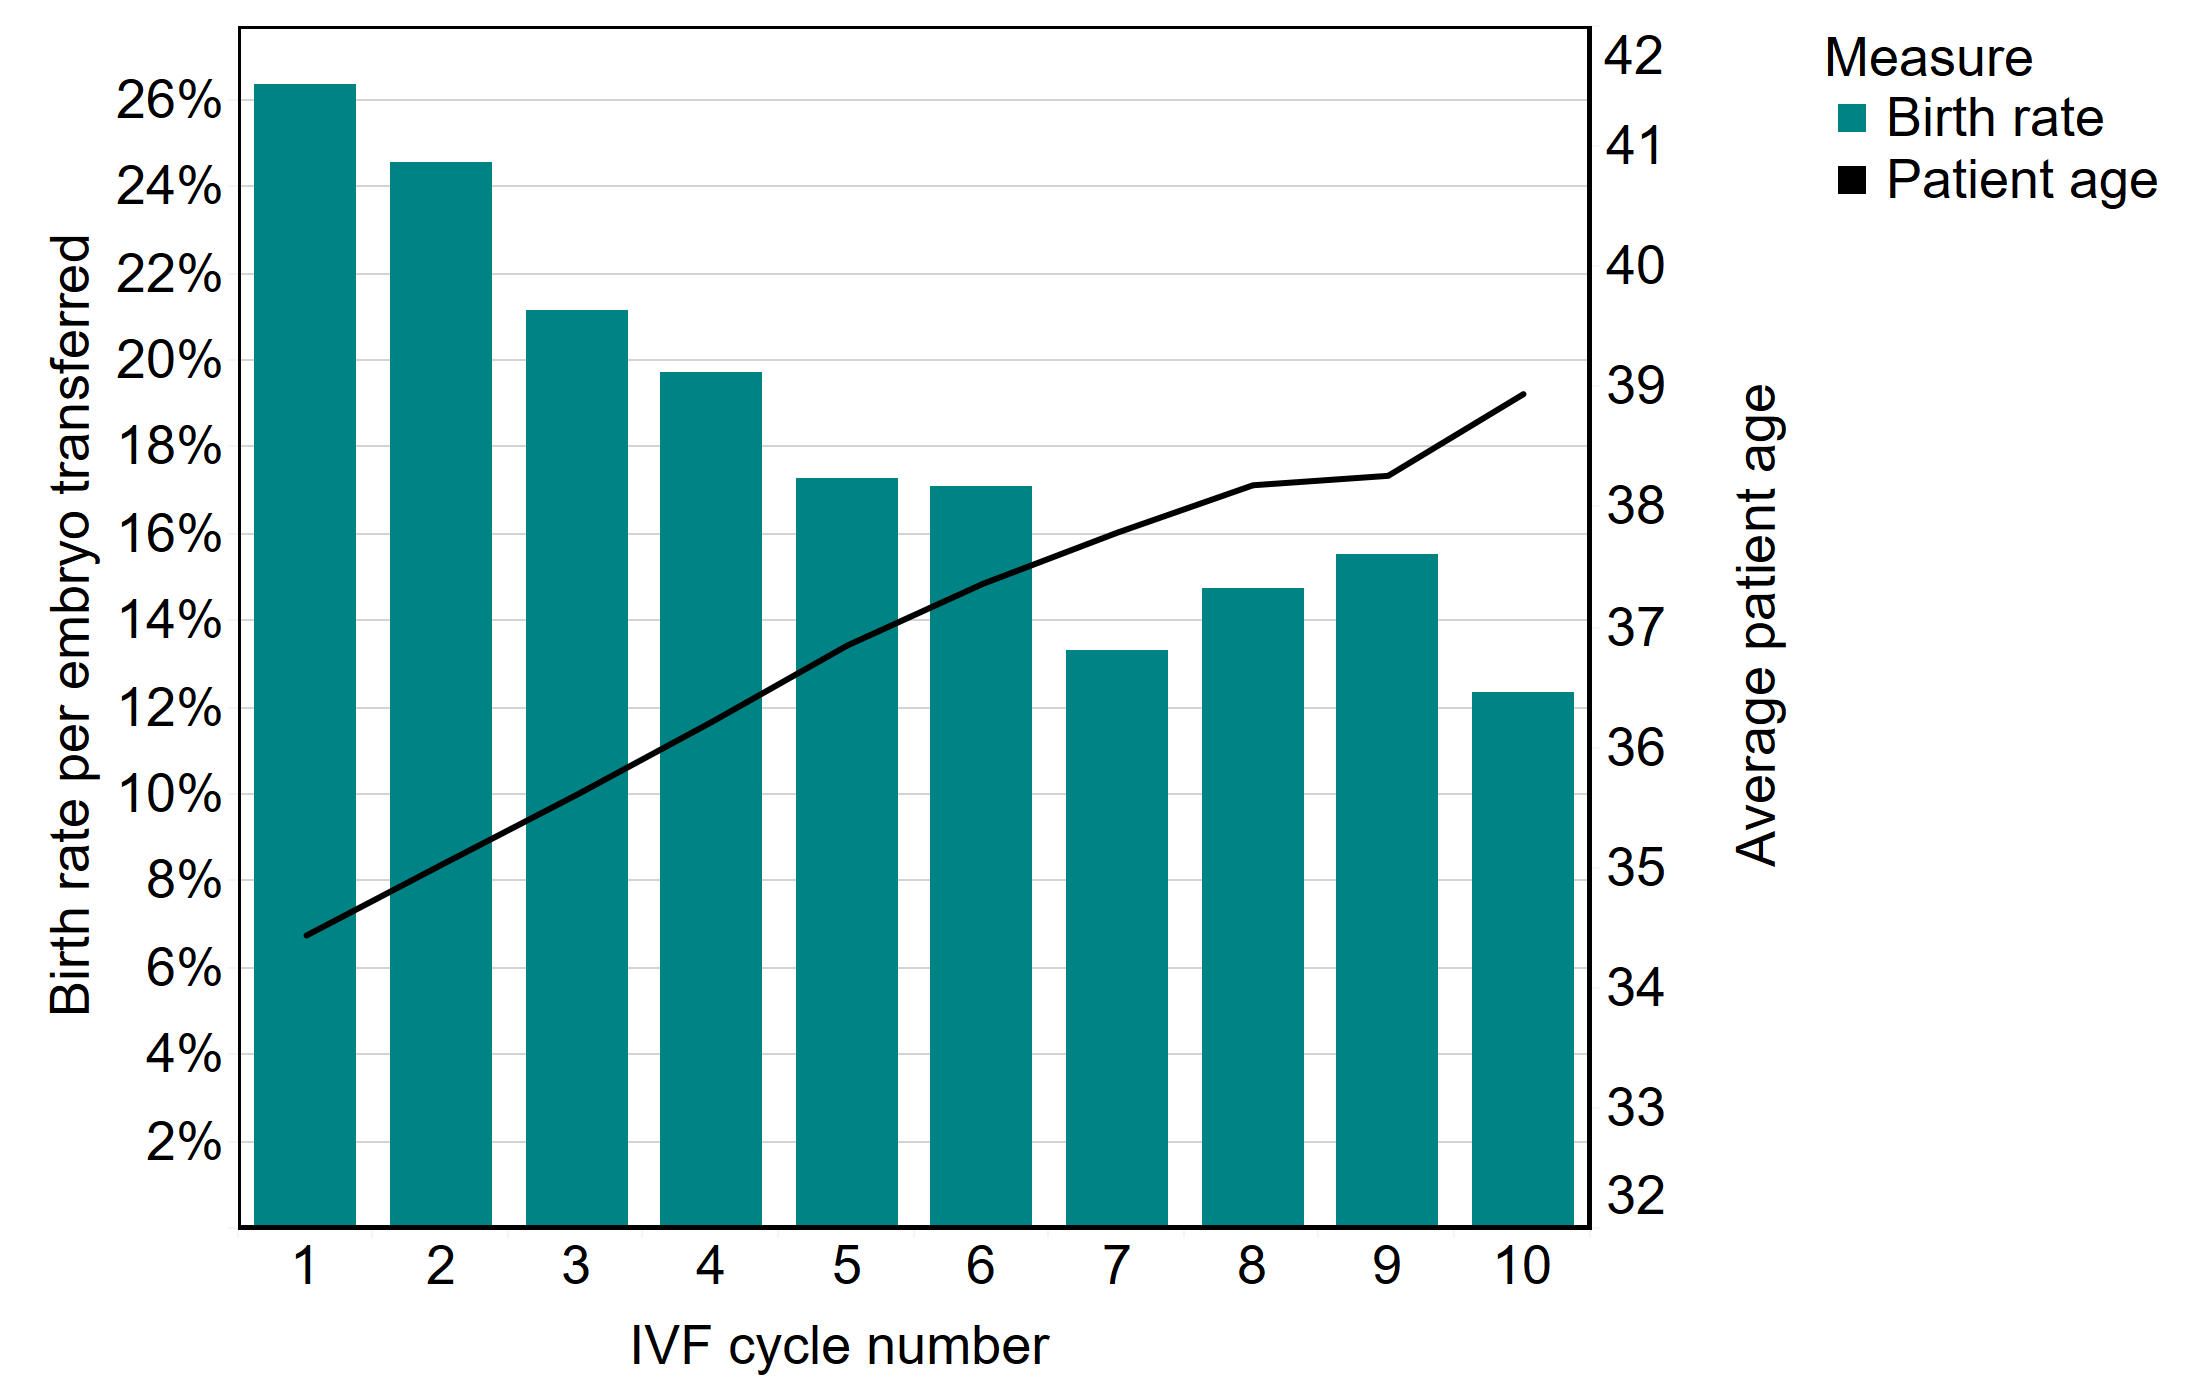 This combination chart shows the live birth rates per embryo transferred by IVF cycle number in 2018 in bars with average patient age overlayed in a line. The graph shows that the live birth rate per embryo transferred decreases by IVF cycle number, while the average patient age increases. The first three IVF cycles have a live birth rate above 20% per embryo transferred and it slowly drops as cycle number increases to about 14% for patients on their 10th IVF cycle. The average age for patients increases from just below 35 years of age on the first IVF cycle to almost 39 on the 10th cycle.